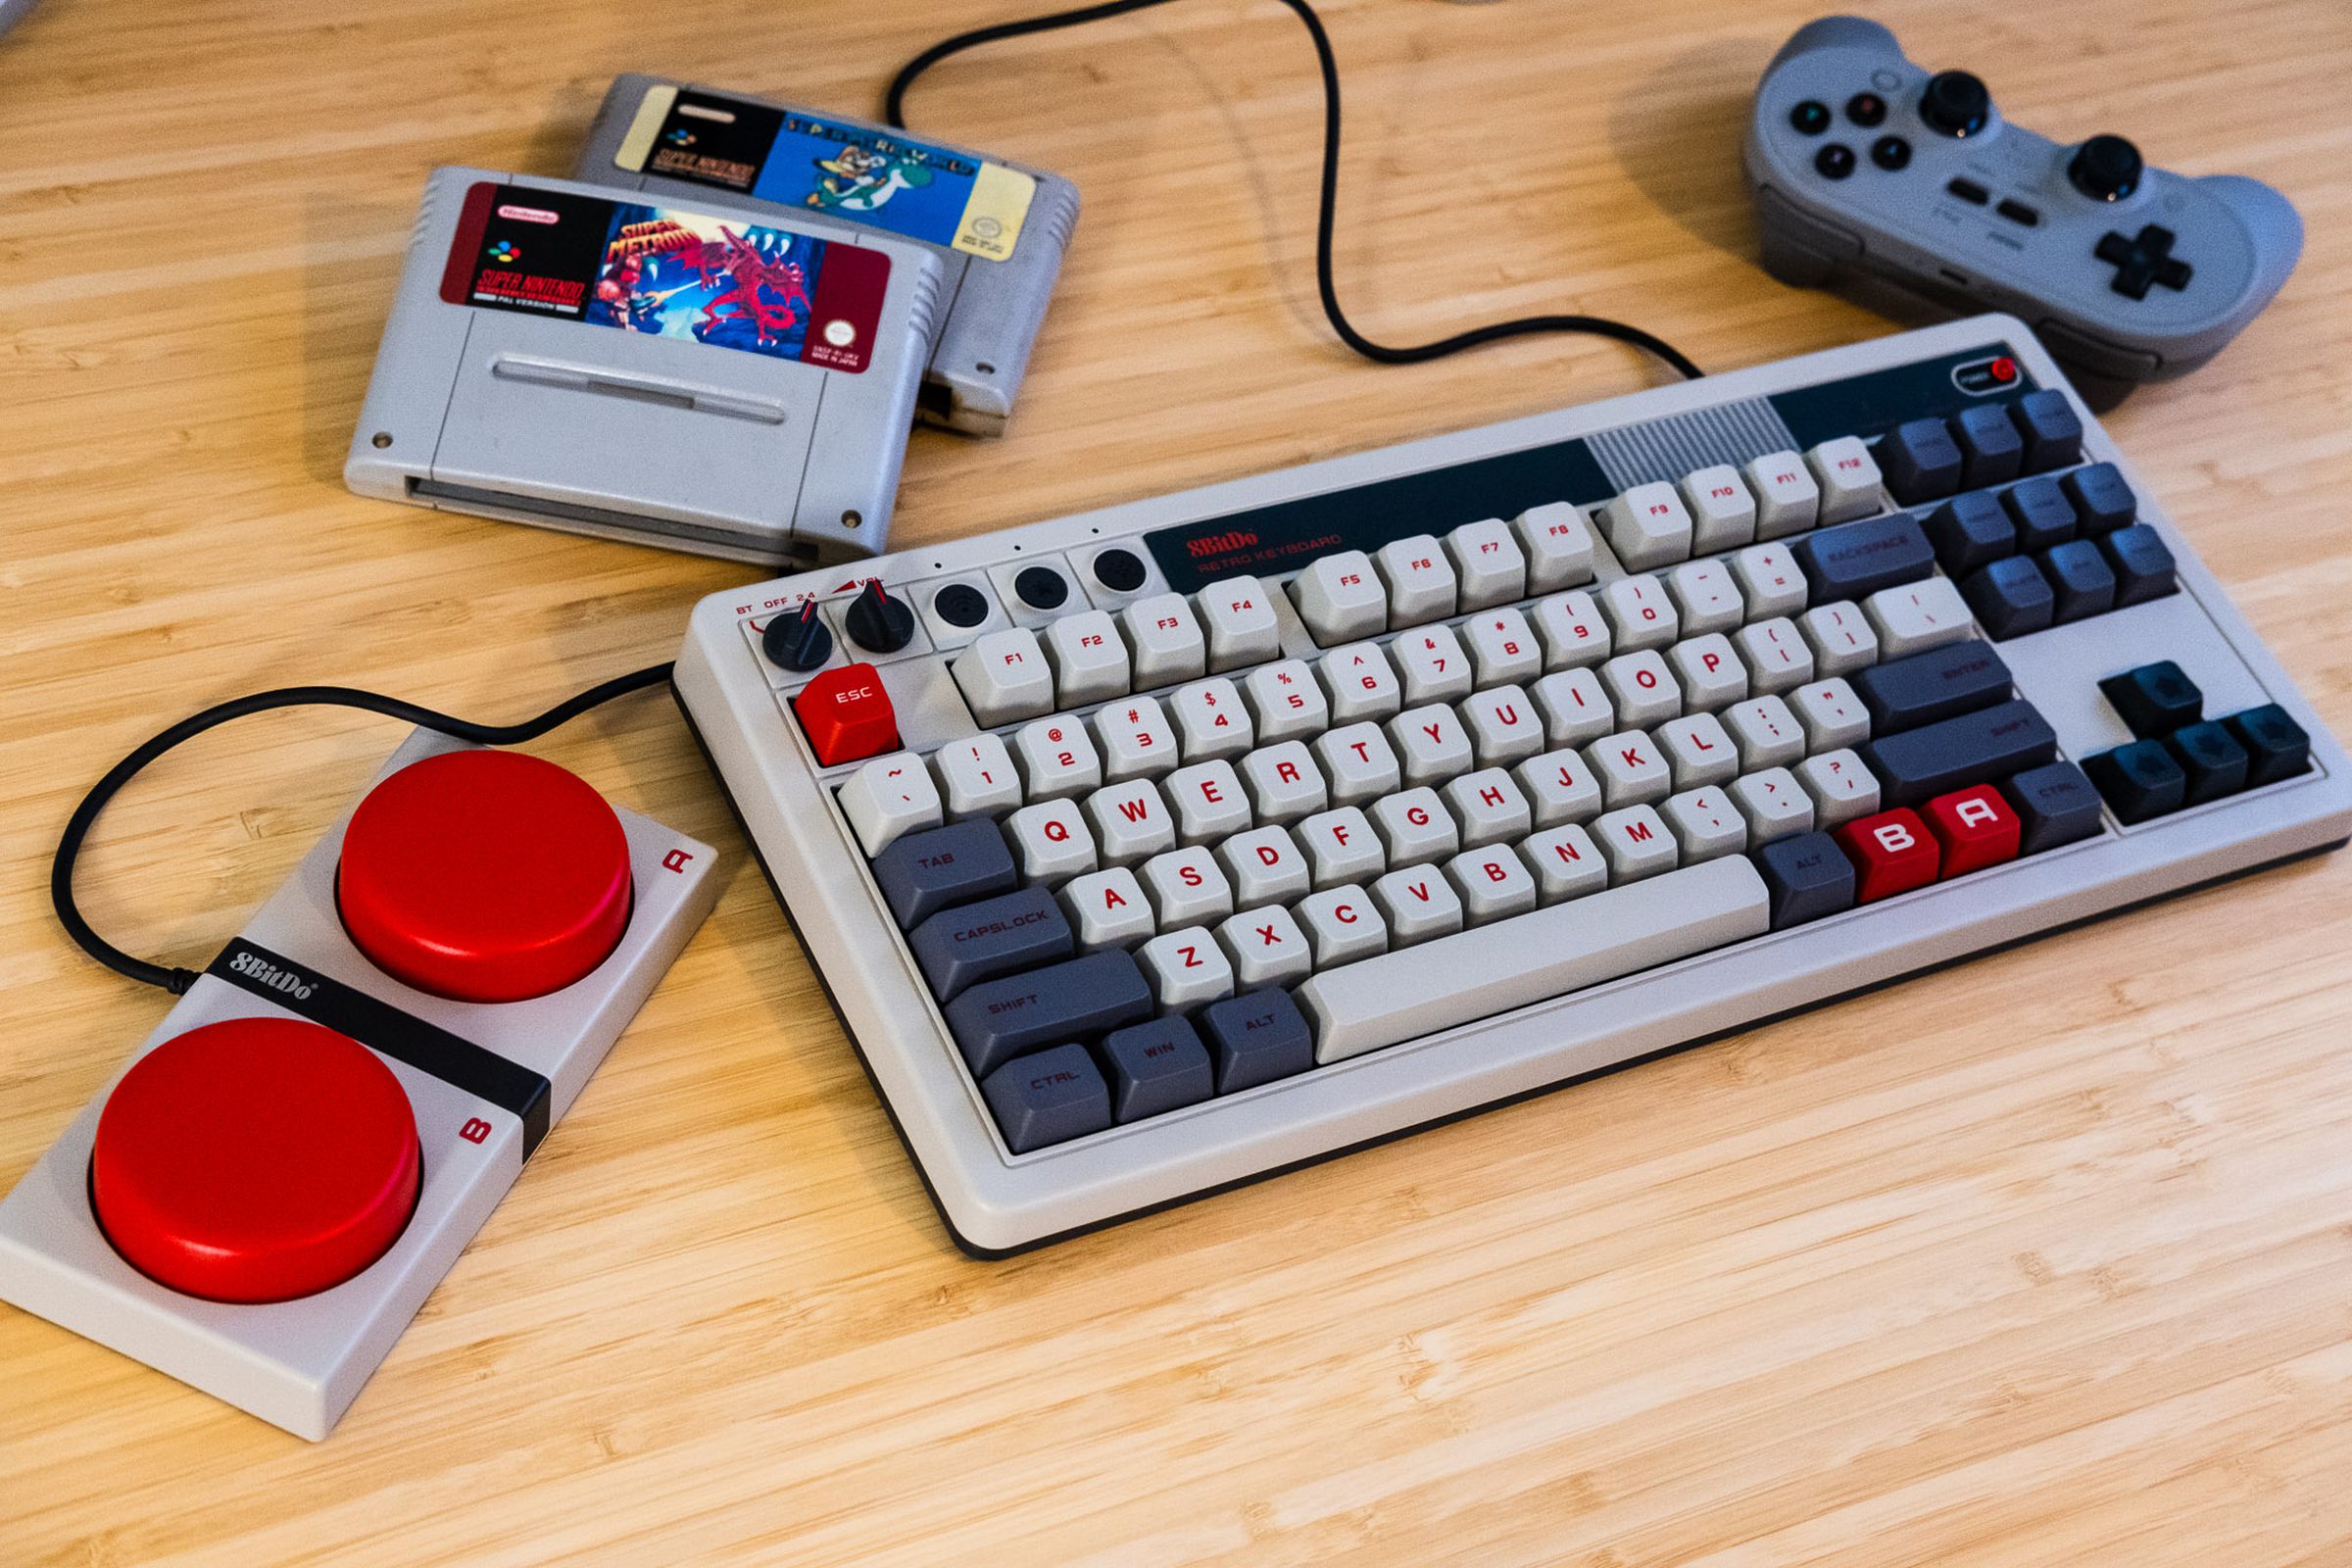 8BitDo Retro Keyboard on a desk next to NES-themed buttons, controller, and SNES cartridges.